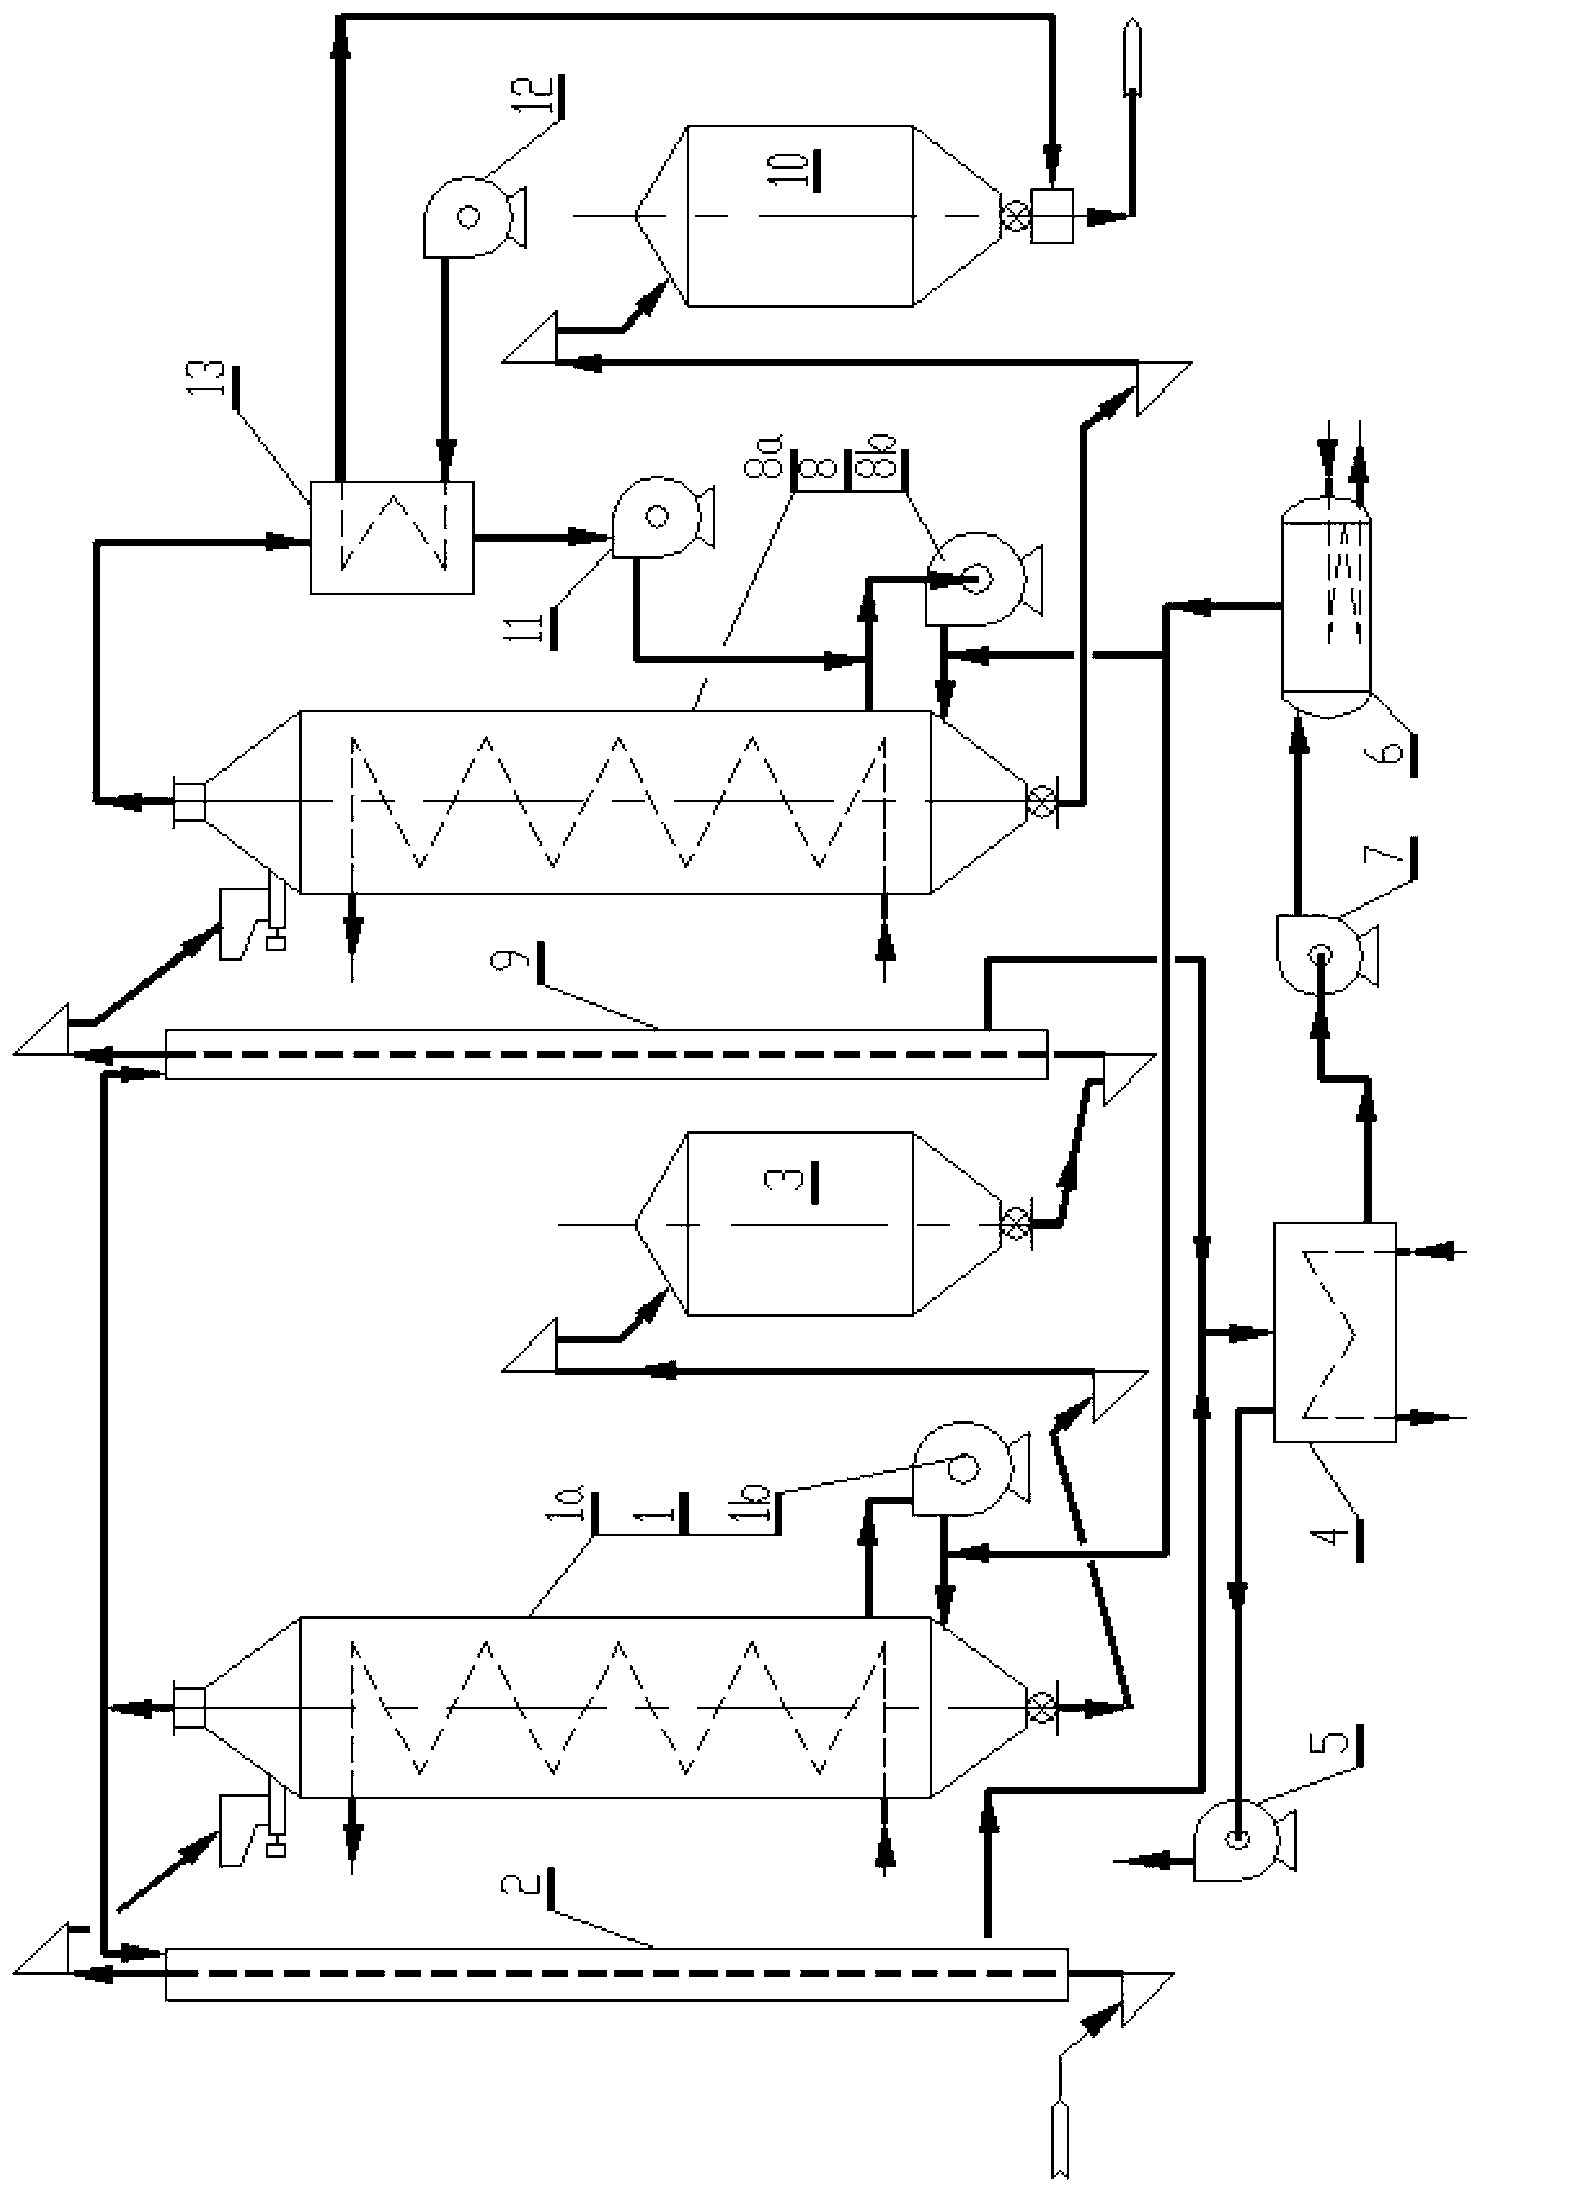 Process method for rapidly drying grains through countercurrent gas flow